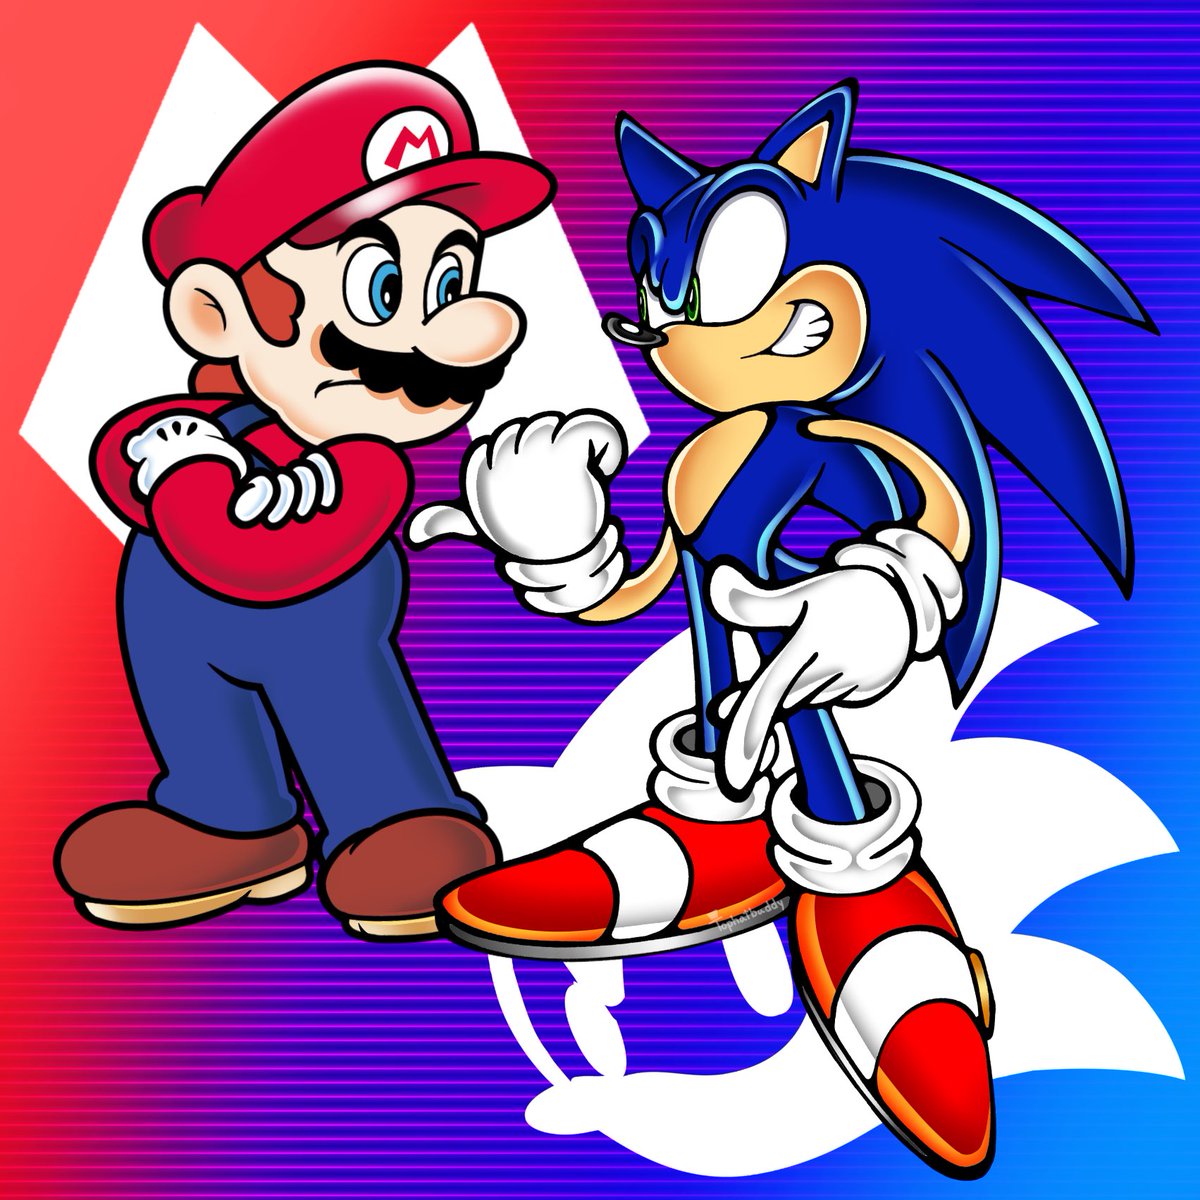 is this relevant? #SonicTheHedgehog #SuperMarioBrosMovie #SuperMarioBros #sonicfanart #mariofanart